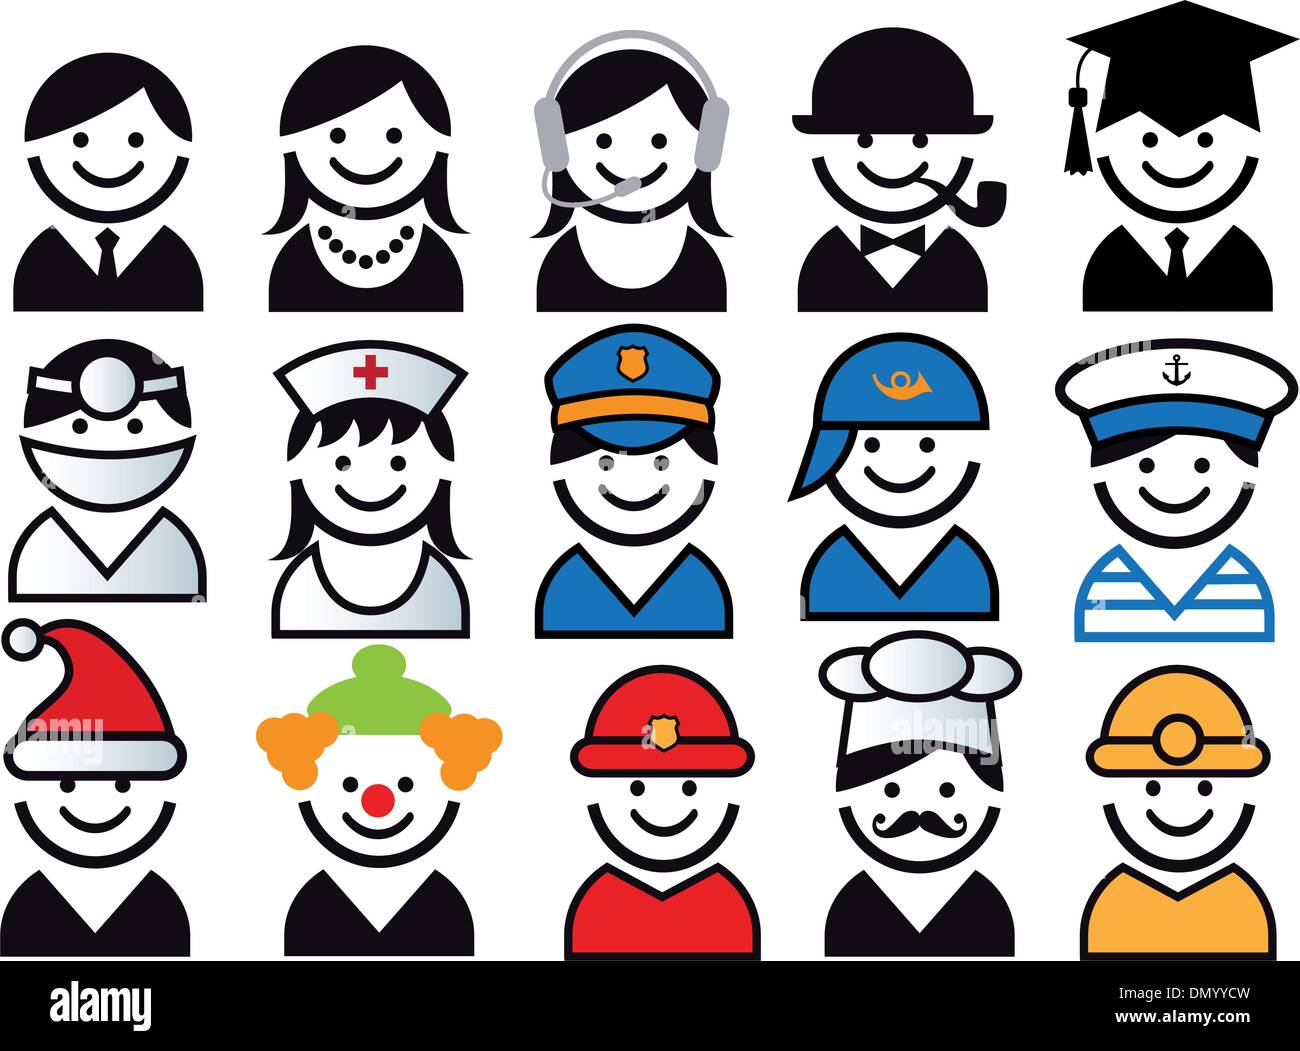 profession vector people icon set Stock Vector